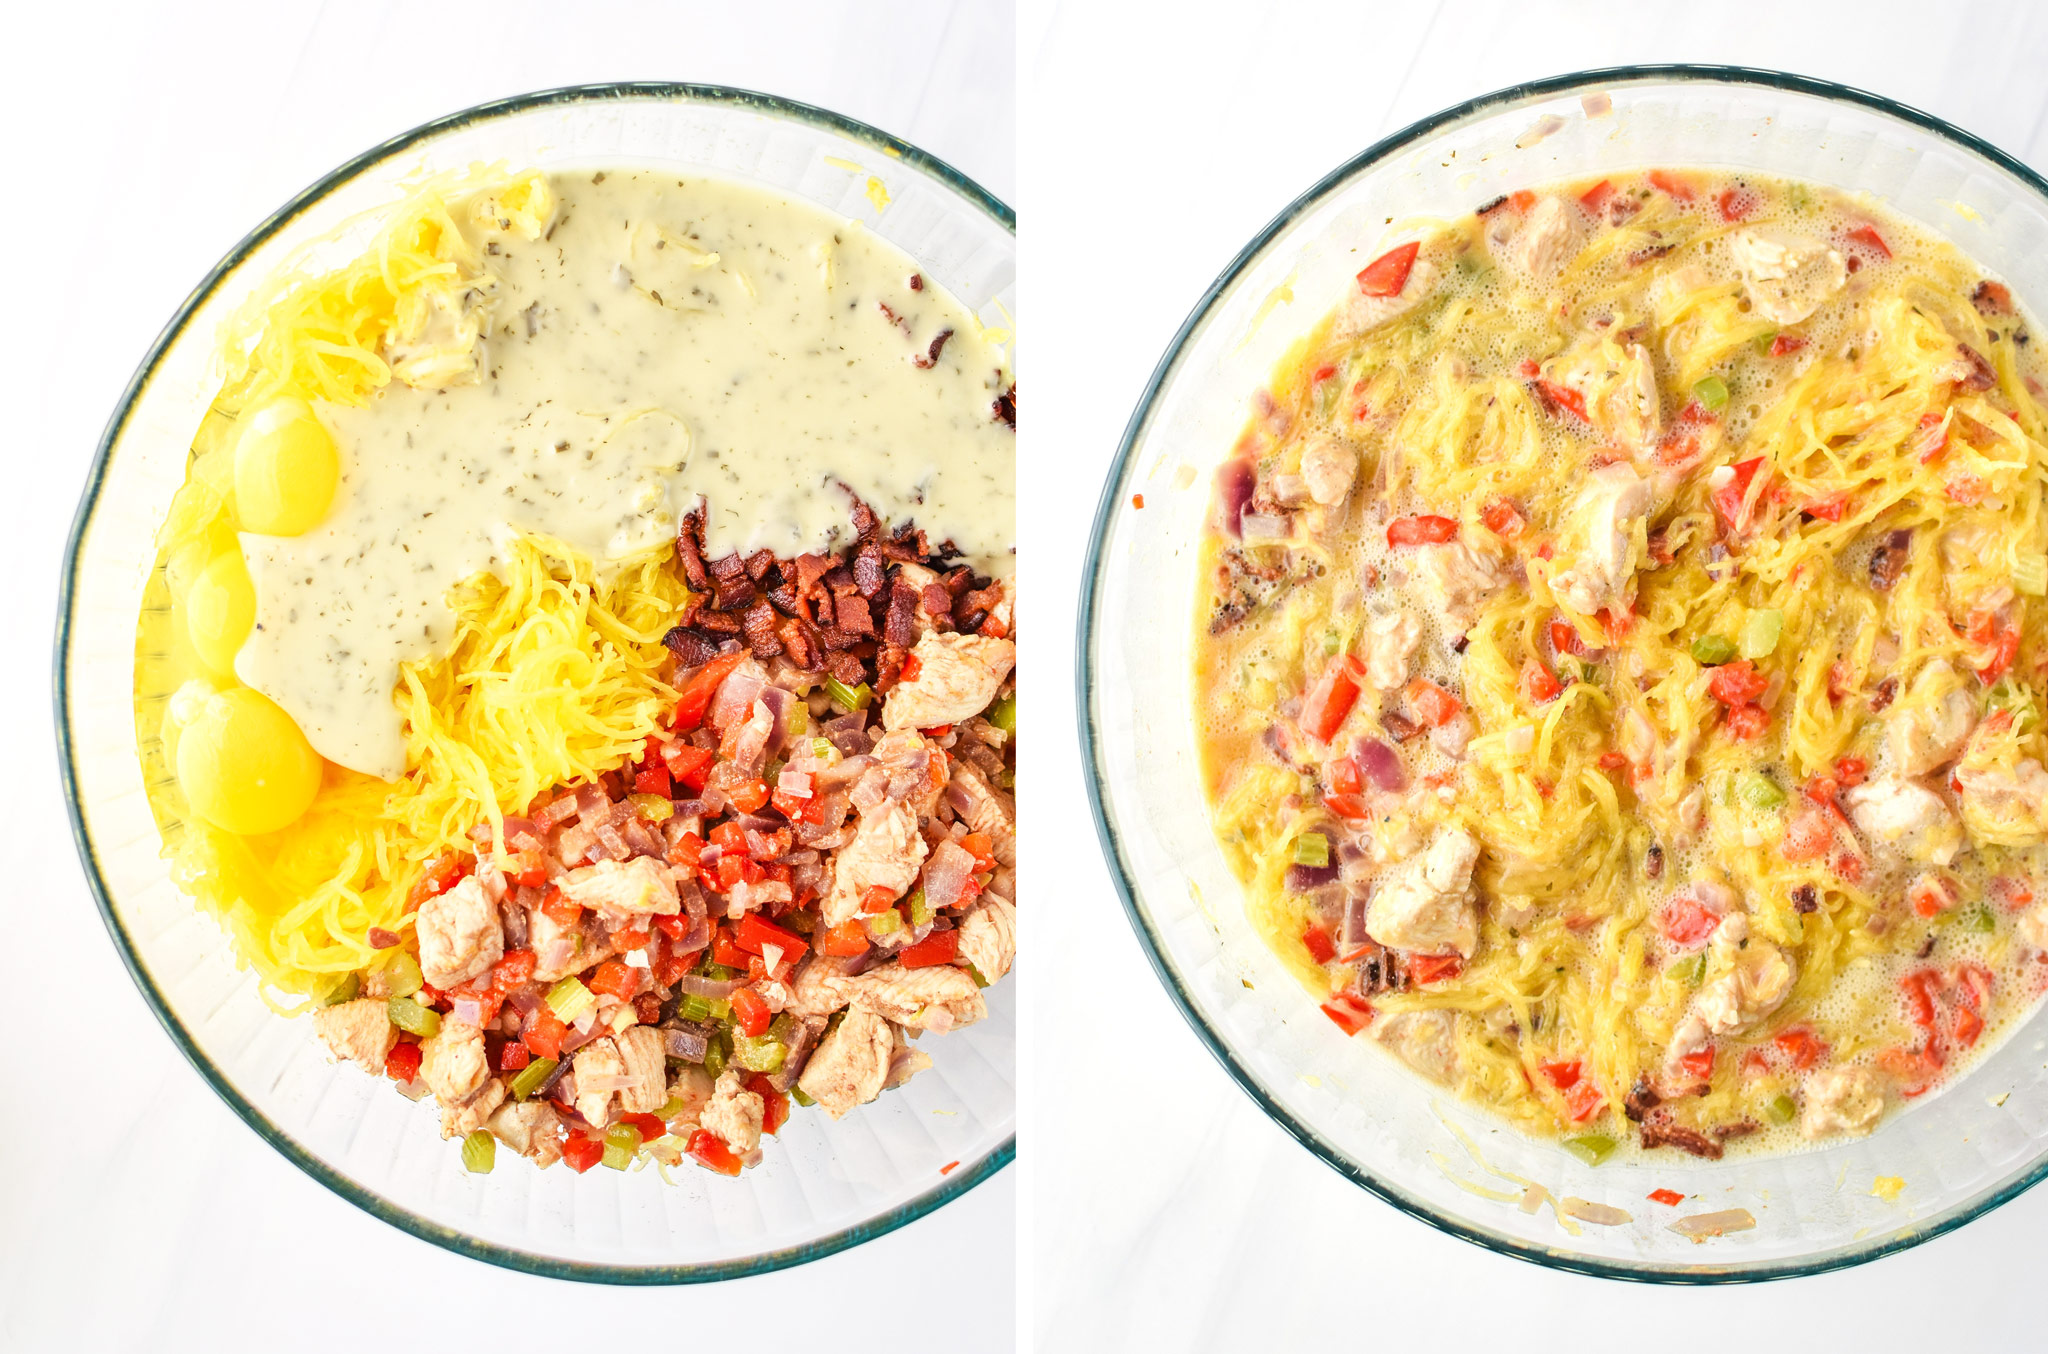 Left: Ingredients unstired for the Whole30 Chicken Bacon Ranch Casserole. Right: All the ingredients stirred together.